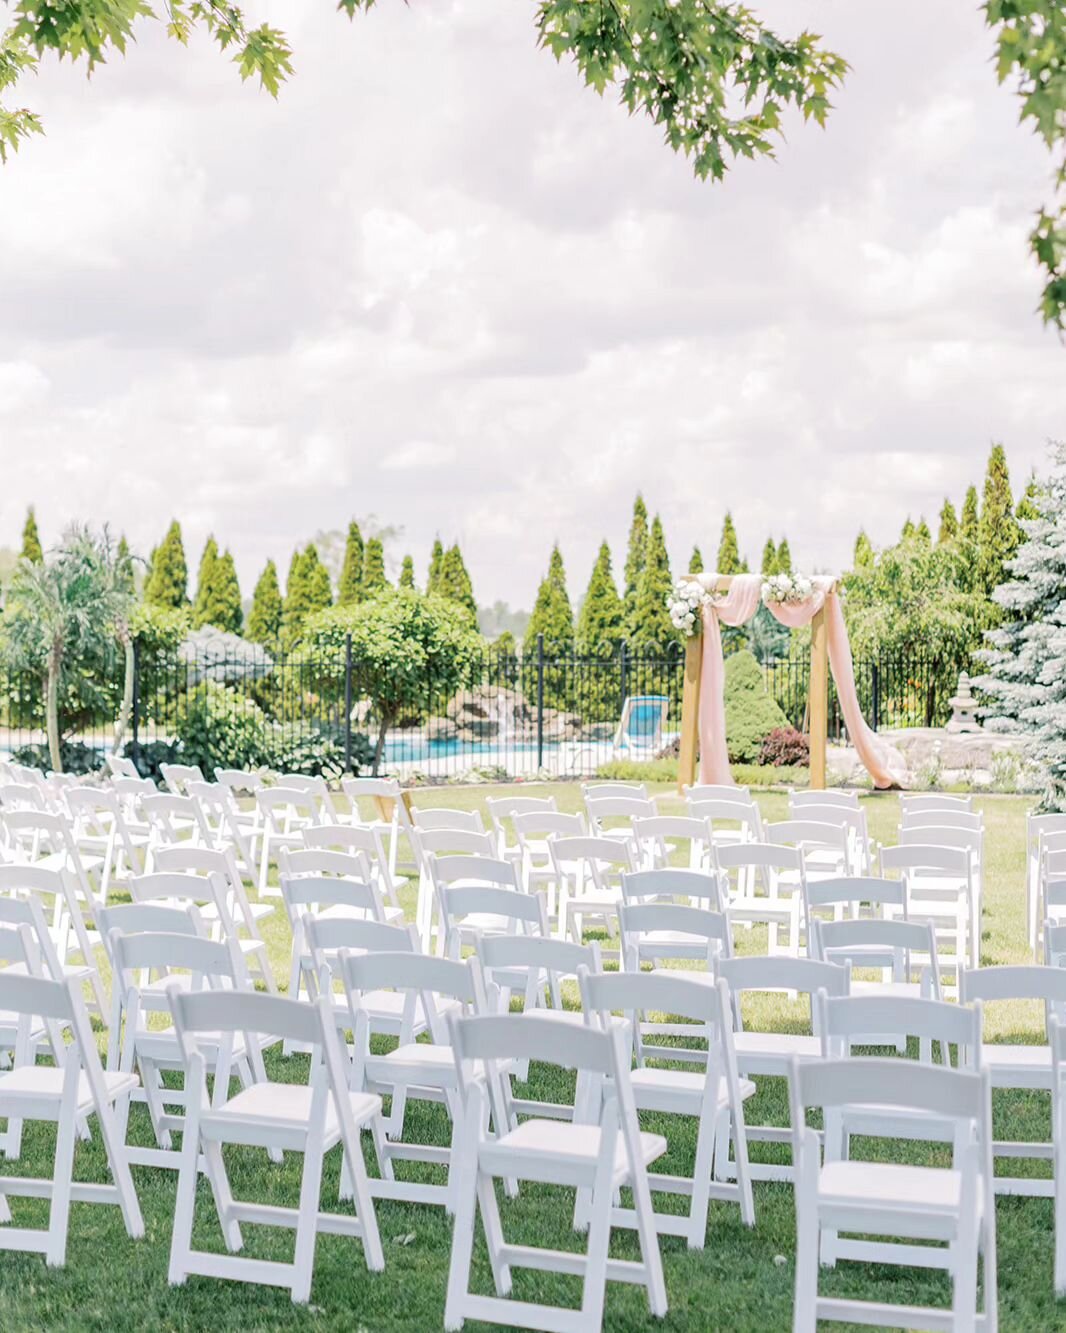 One of several chair options we carry, these white folding garden chairs are perfect for your outdoor ceremony 🤍

Bride: @andreaosztro
Photographer: @paulavisco
Our florist @thebloomstudioca 

#hamontwedding #hamiltonweddingflorist #weddingrentals #